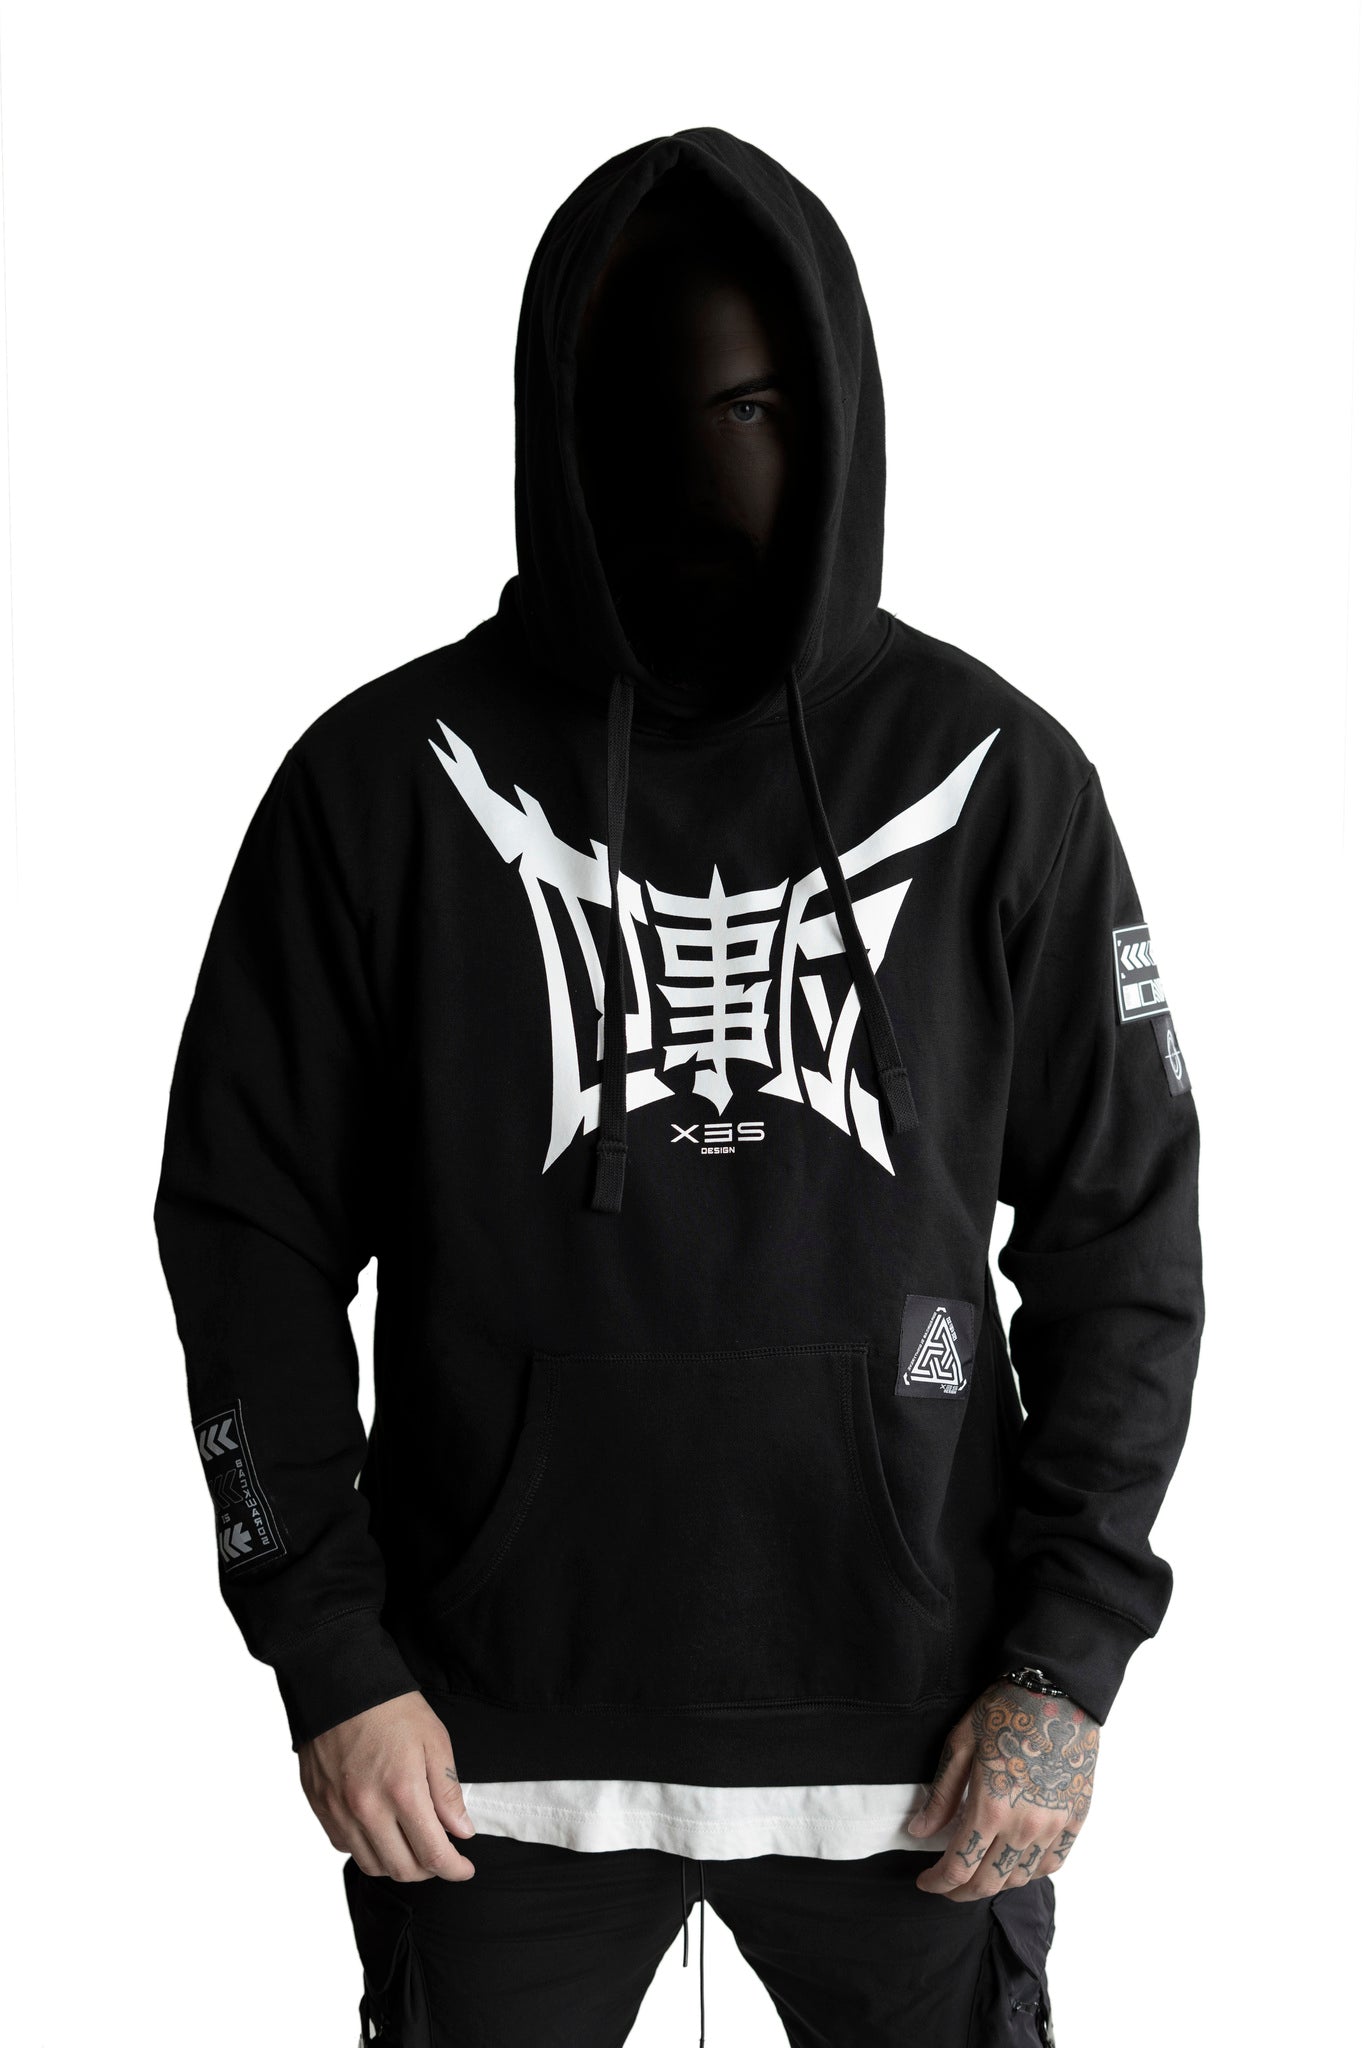 Cyber Fusion Hoodie 2.0 by XES